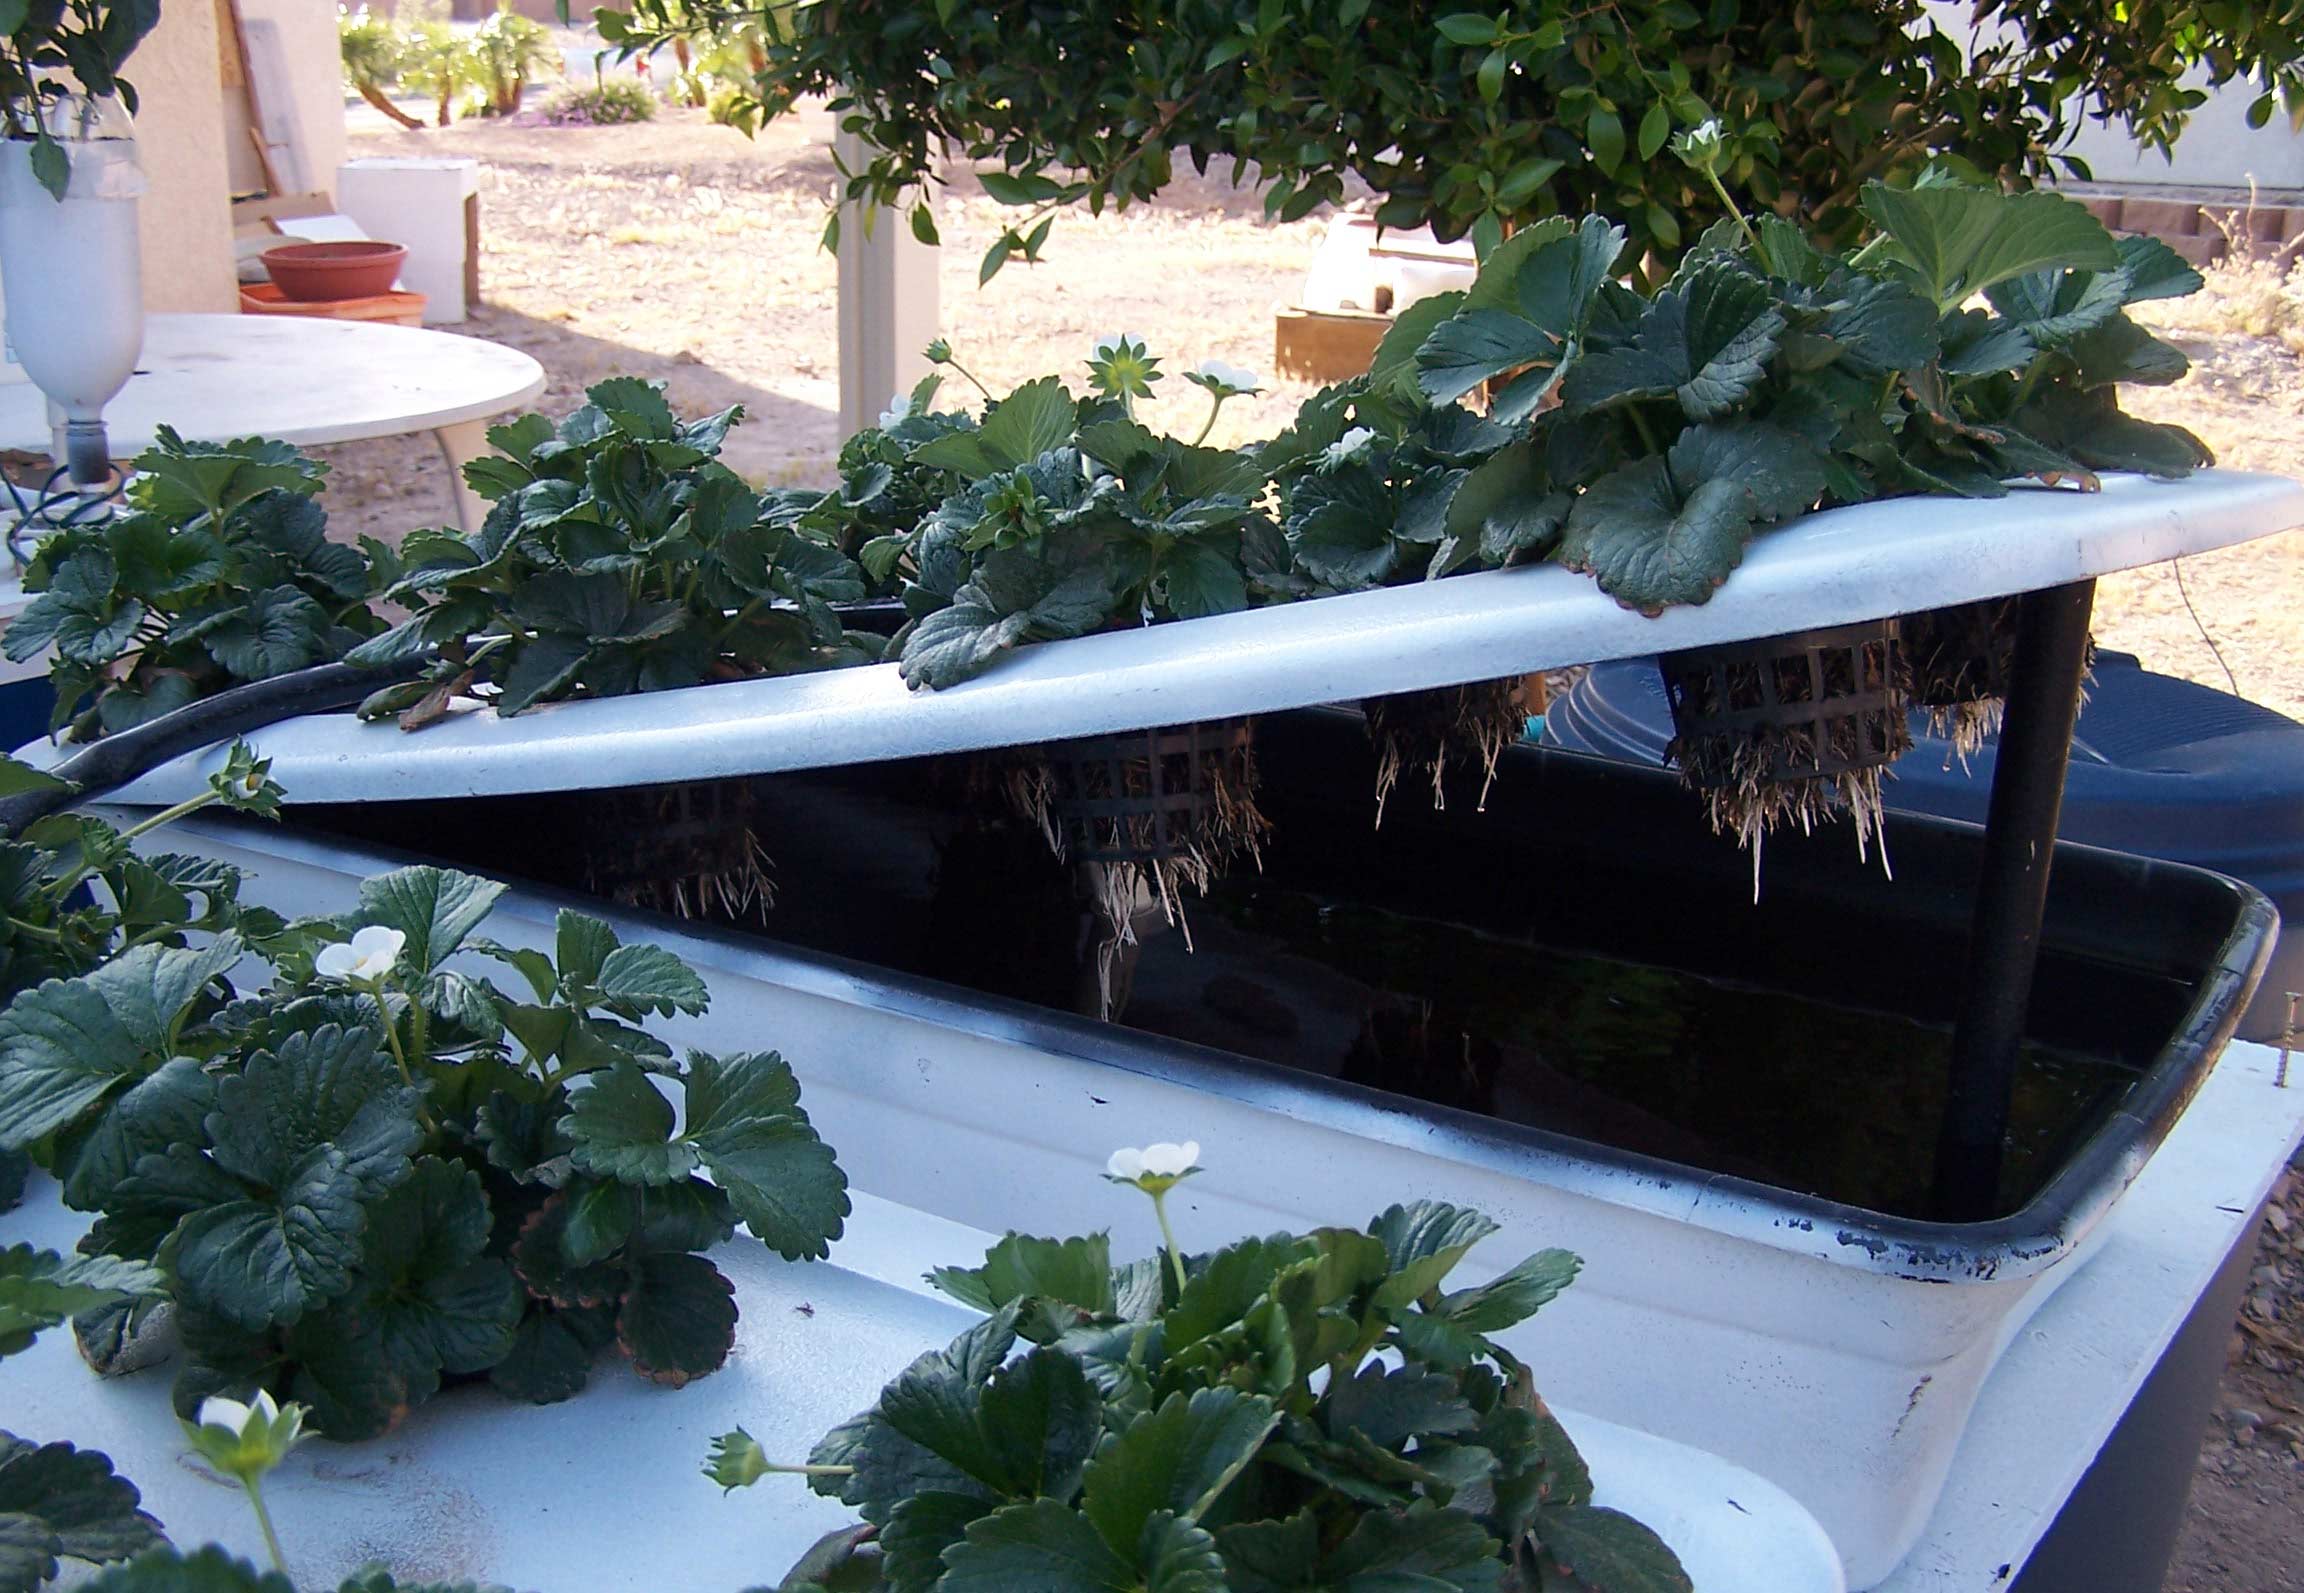 How to Build your own Hydroponic Systems